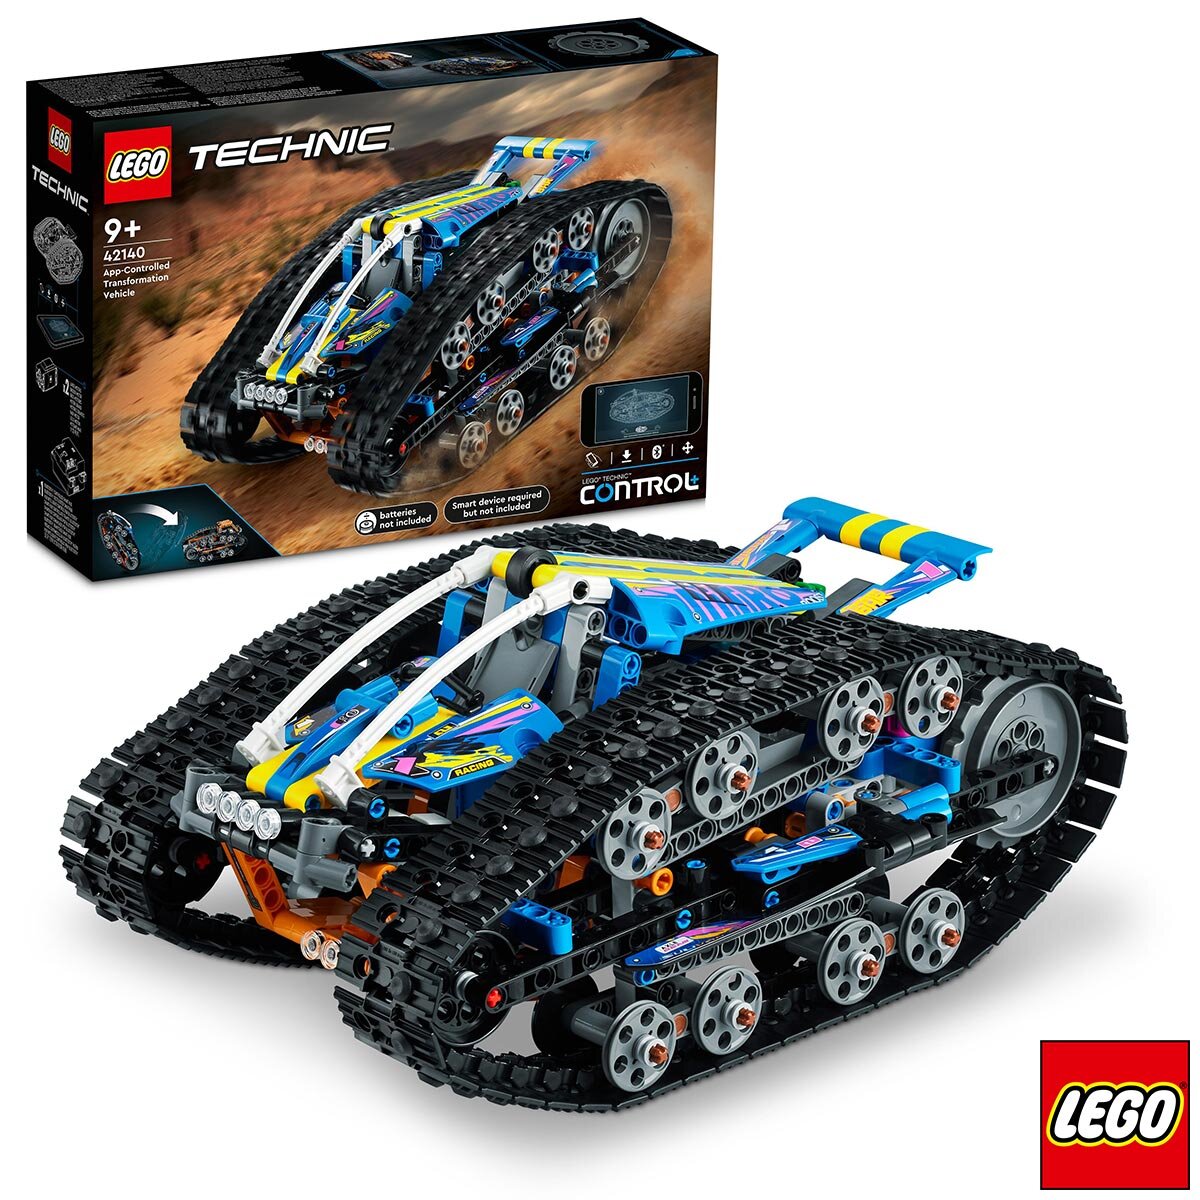 Buy LEGO Technic App-Controlled Transformation Vehicle Box & Items Image at Costco.co.uk